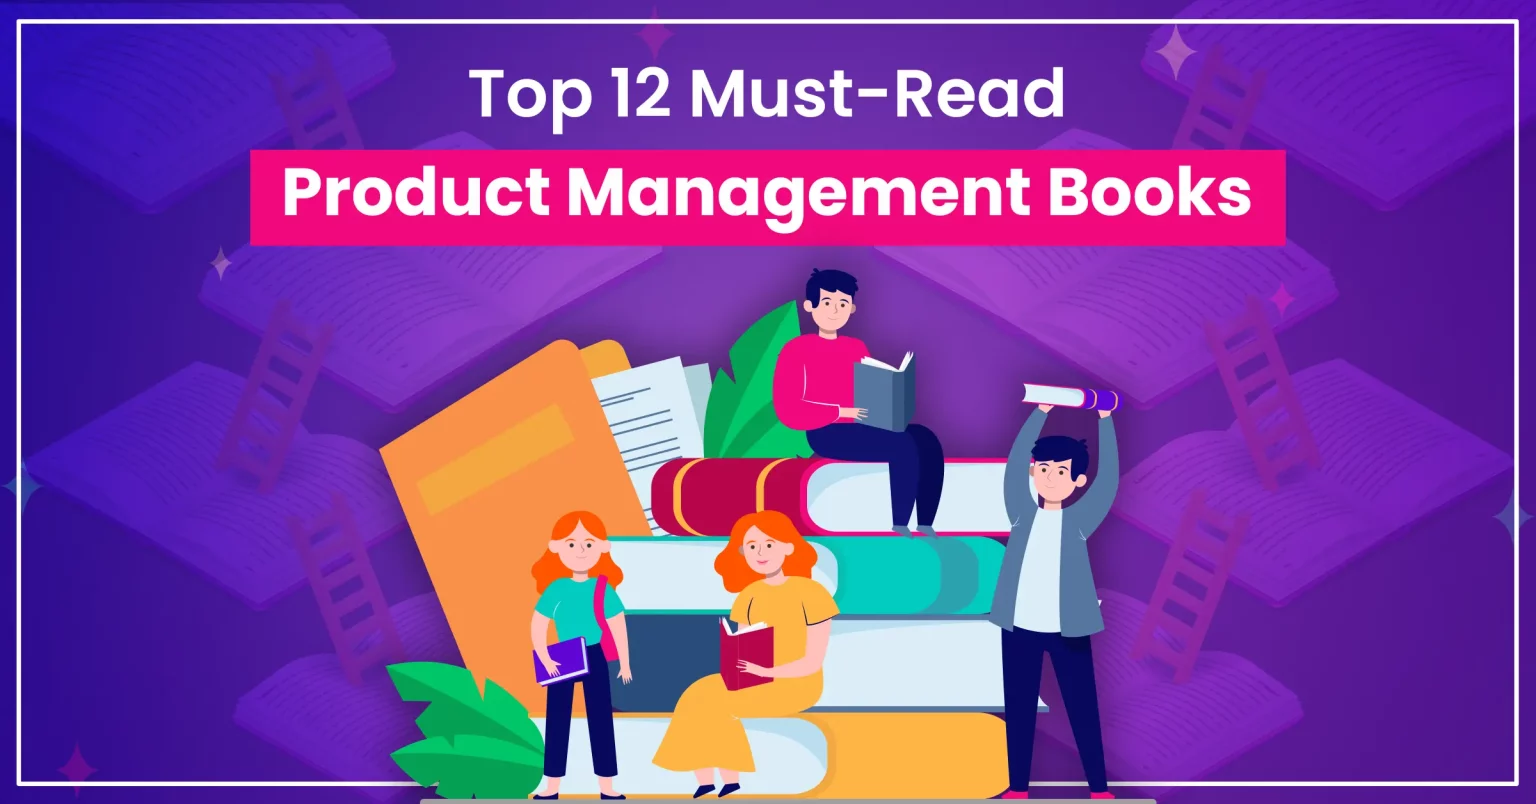 Web banner for top 12 must-read product management books